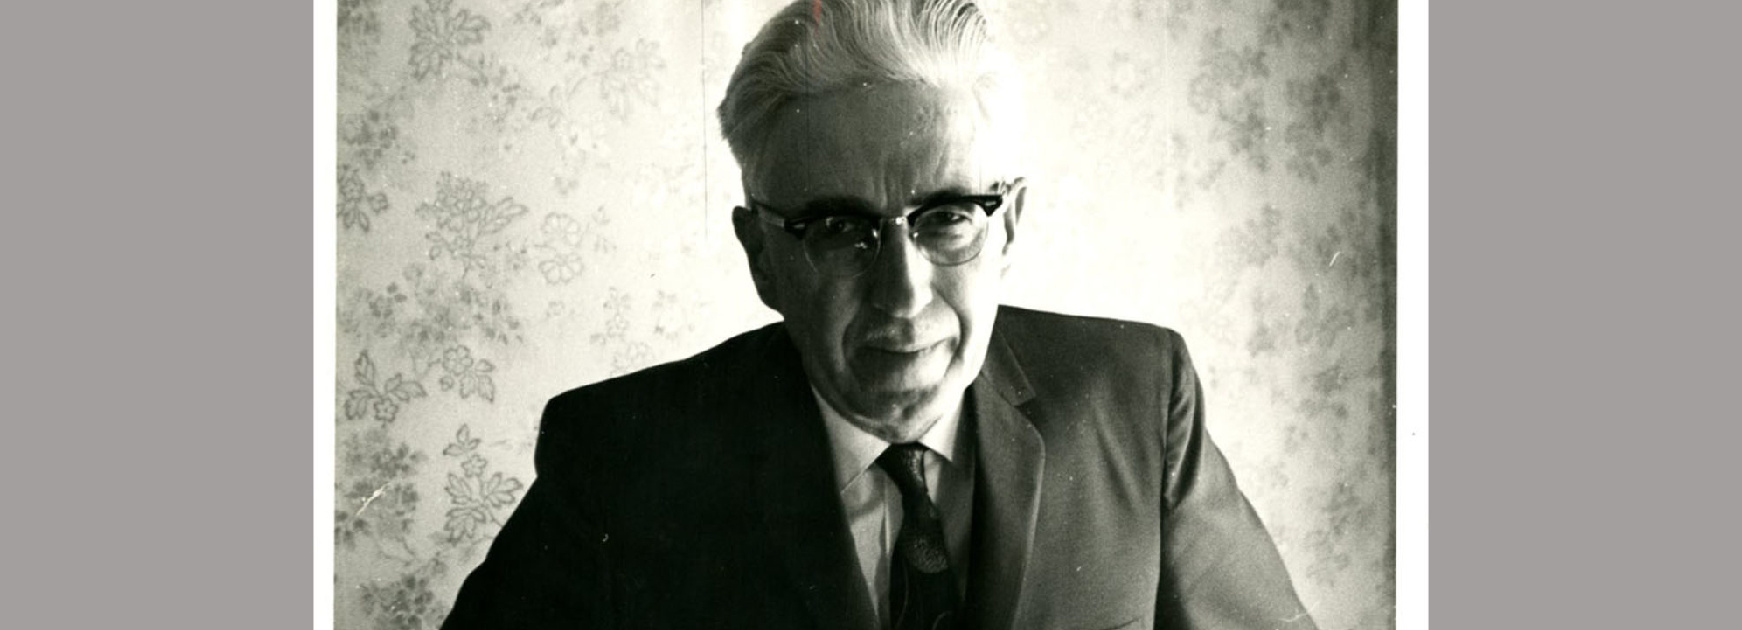 Black and white portrait of Clyfford Still wearing a suit and tie and glasses